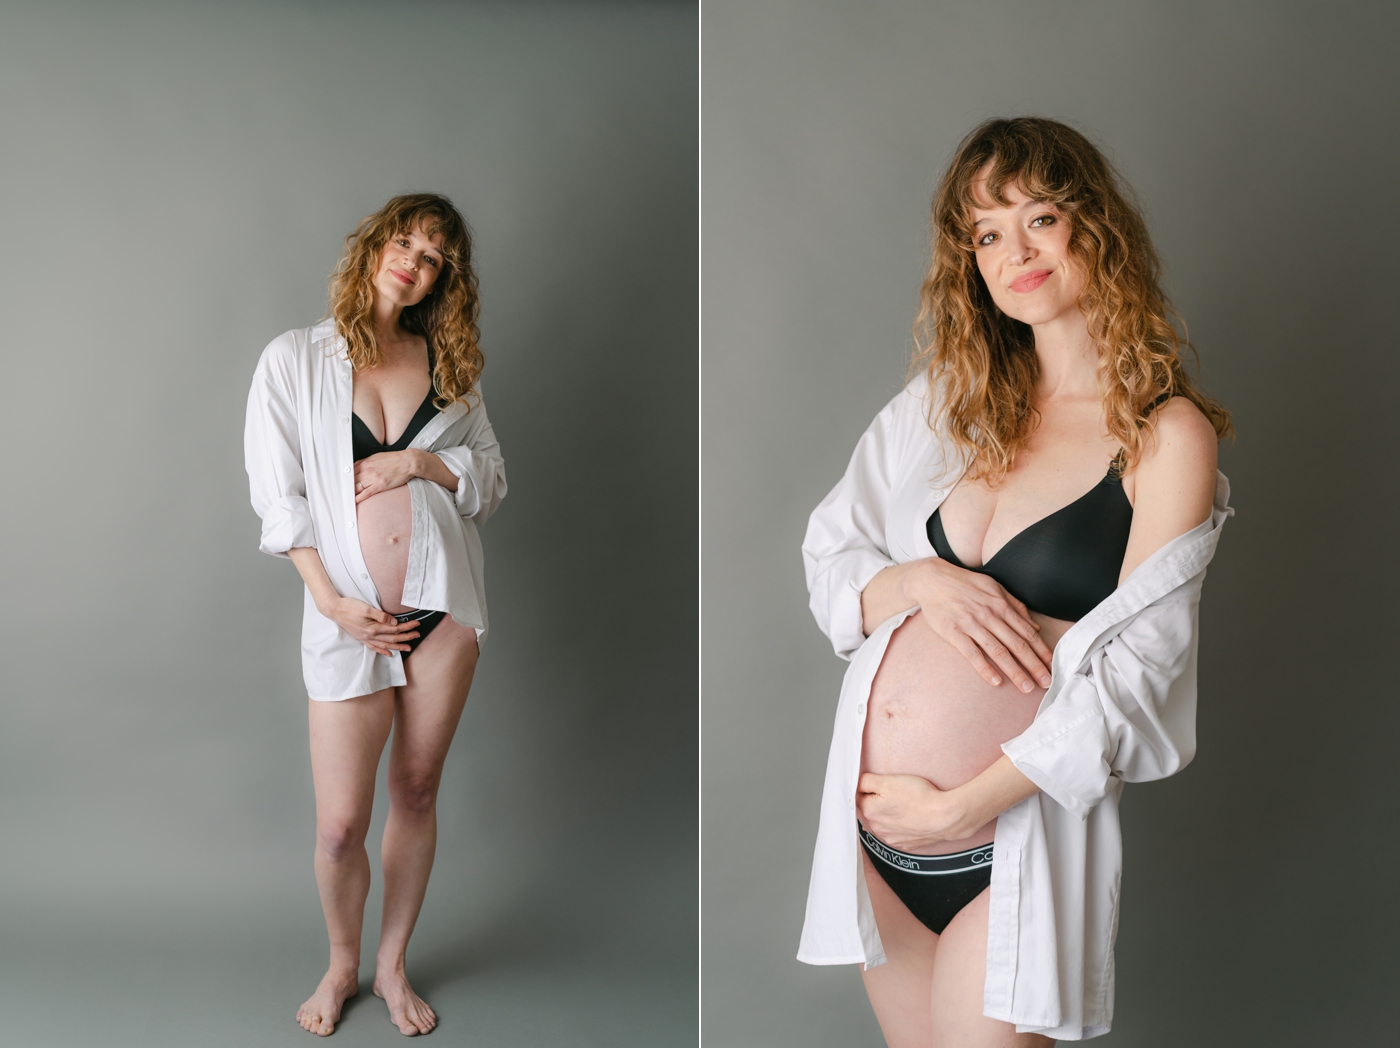 Mom in studio maternity session with oversized white shirt draped over shoulders. Photo by Lauren Sosler Photography.